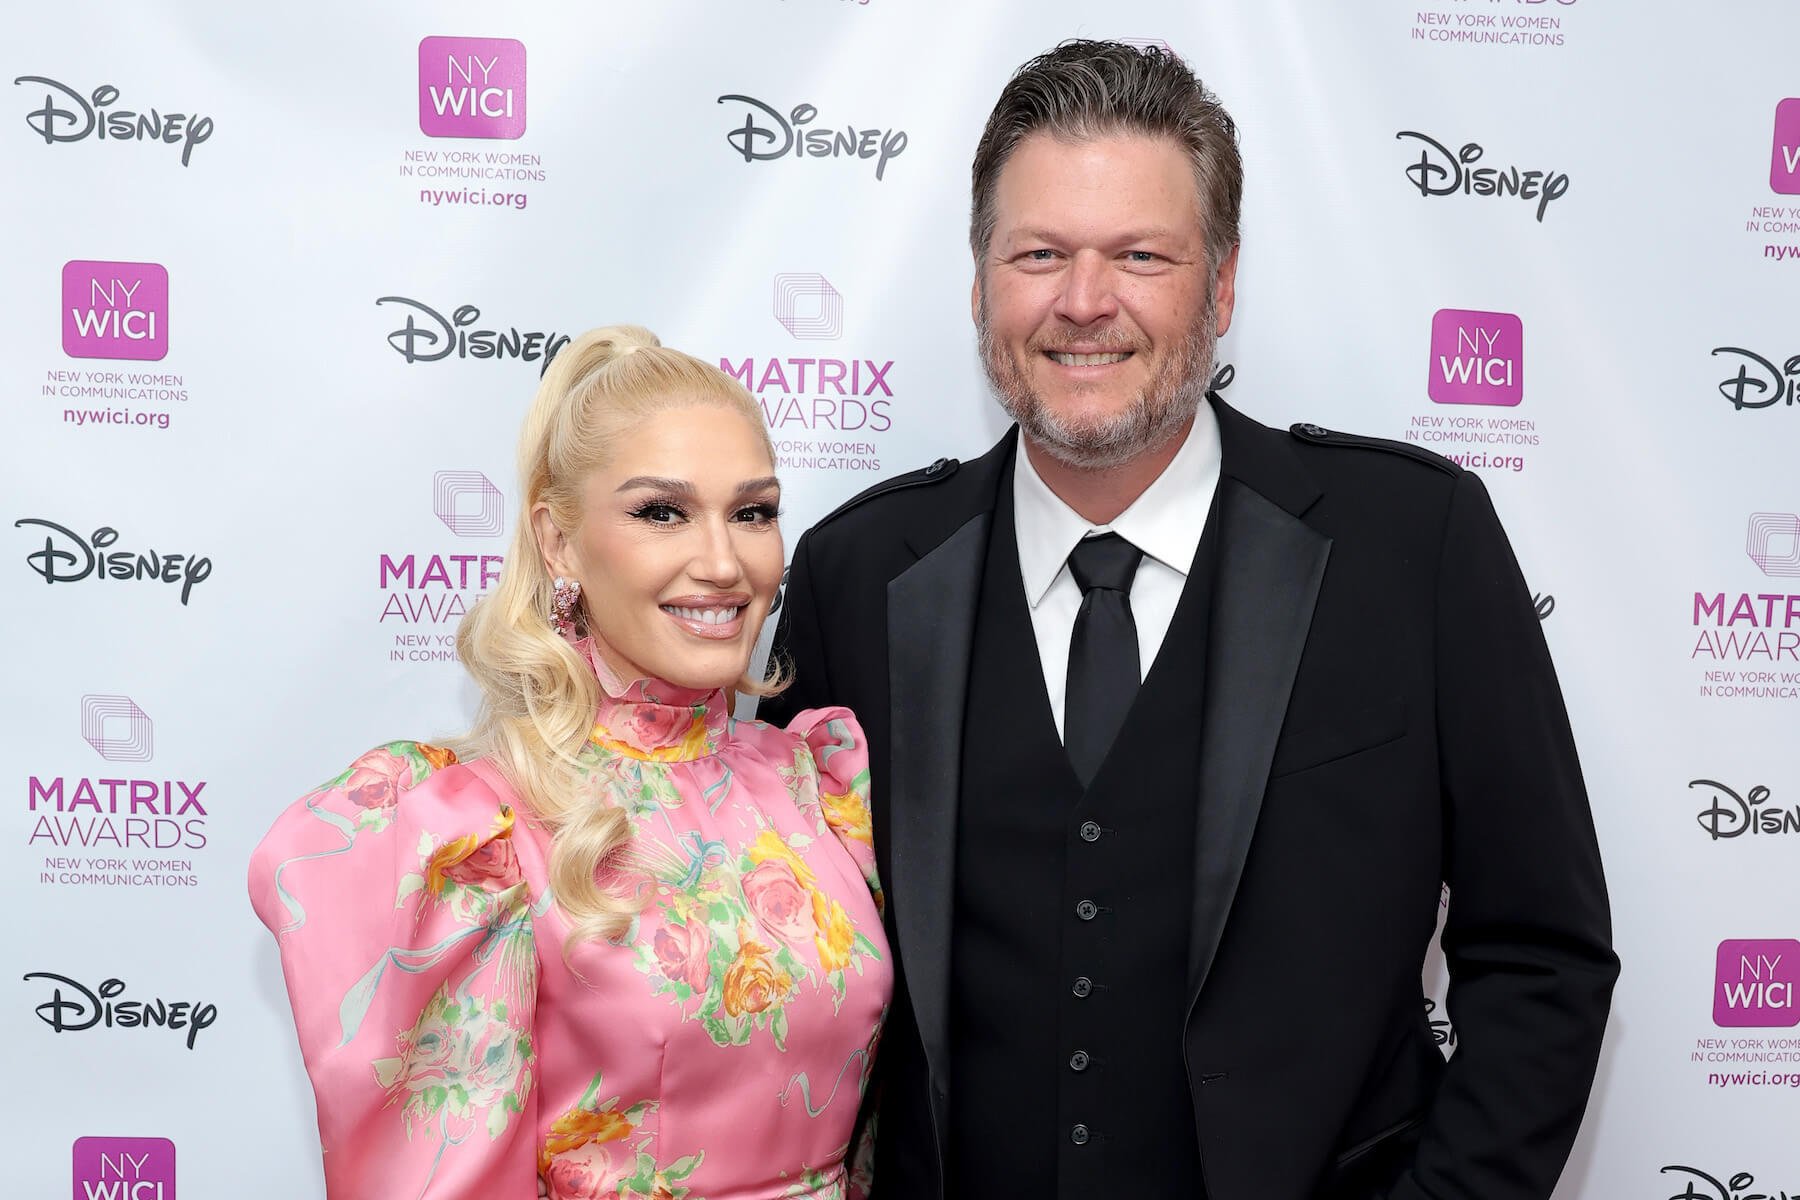 Gwen Stefani and Blake Shelton standing side by side and smiling at a Disney event